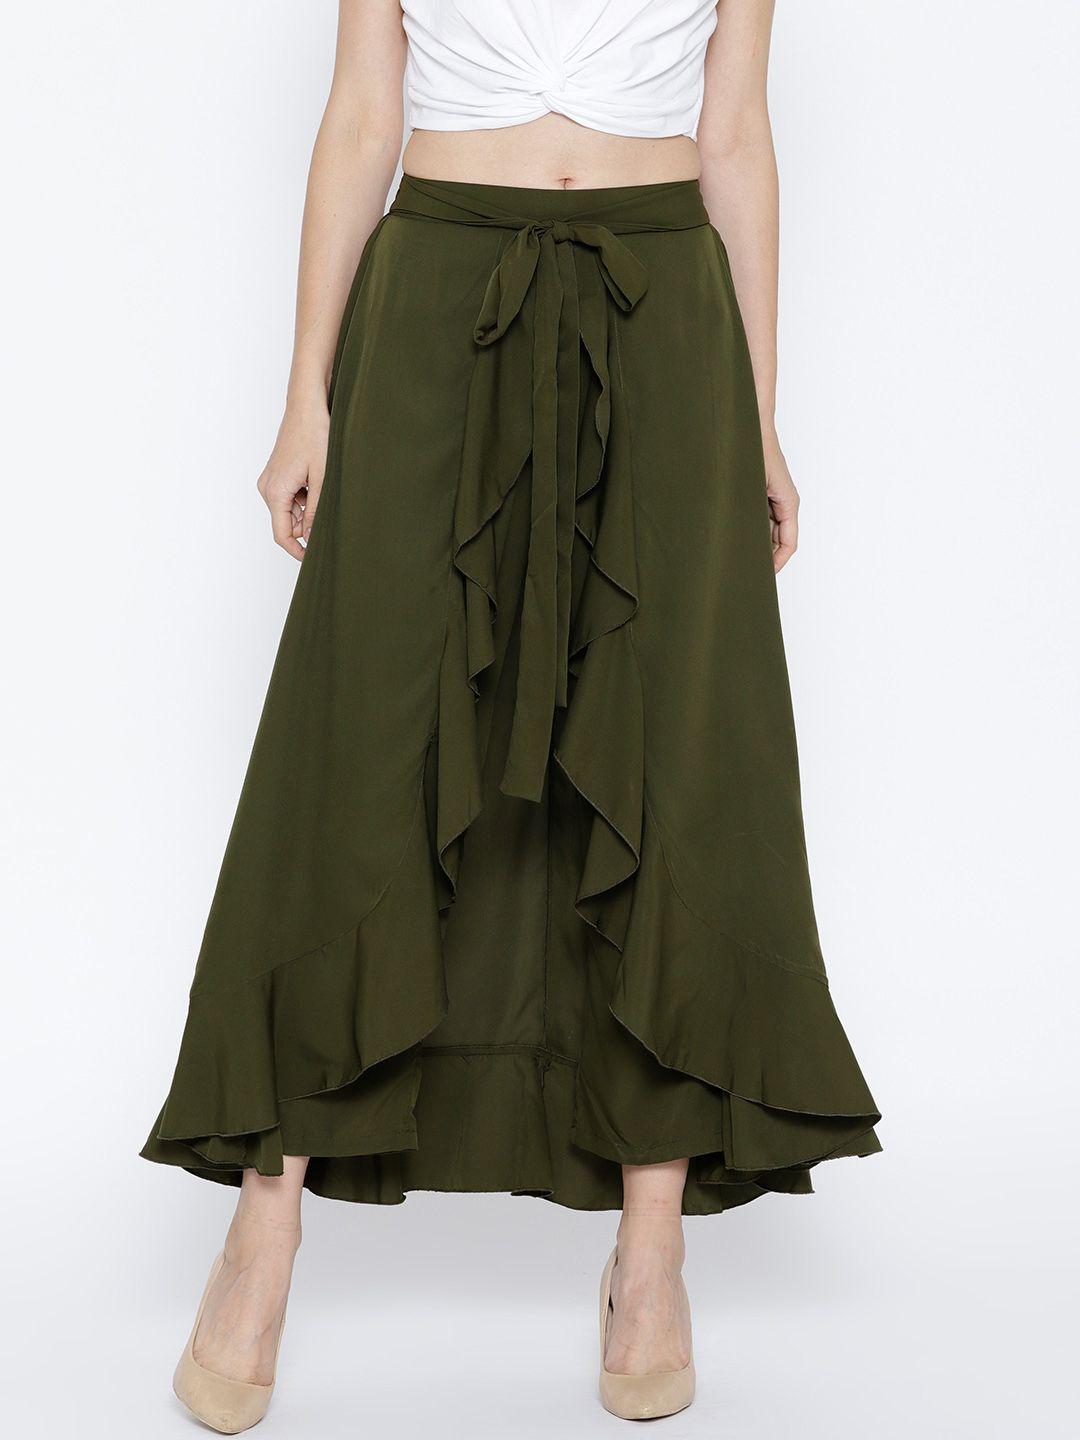 berrylush-olive-green-solid-ruffled-flared-maxi-skirt-with-attached-trousers